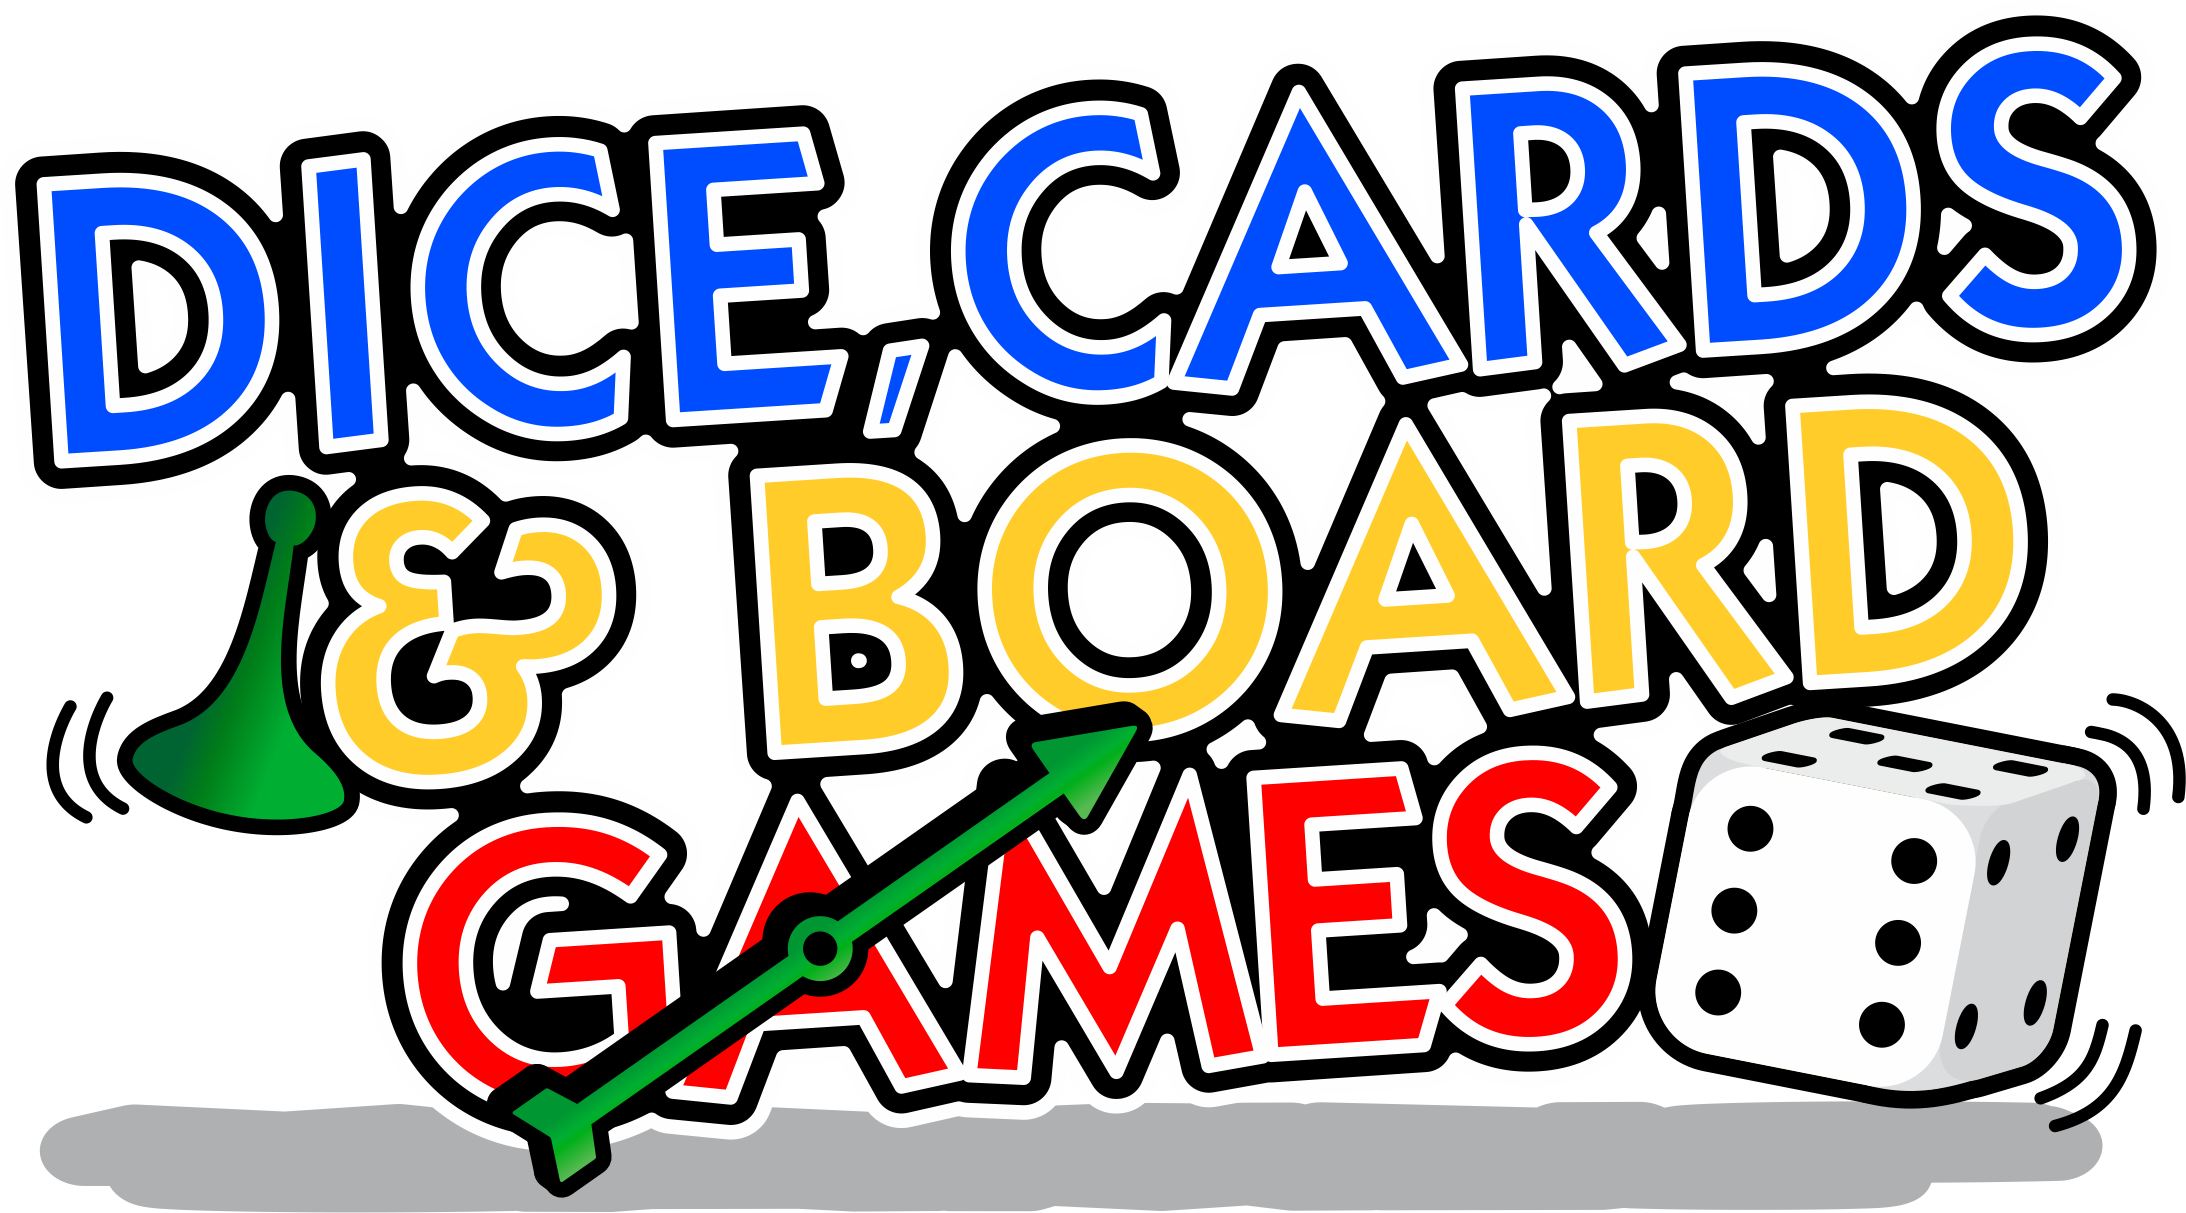 Dice, Cards & Board Games - Board And Card Games Clip Art (2186x1213)